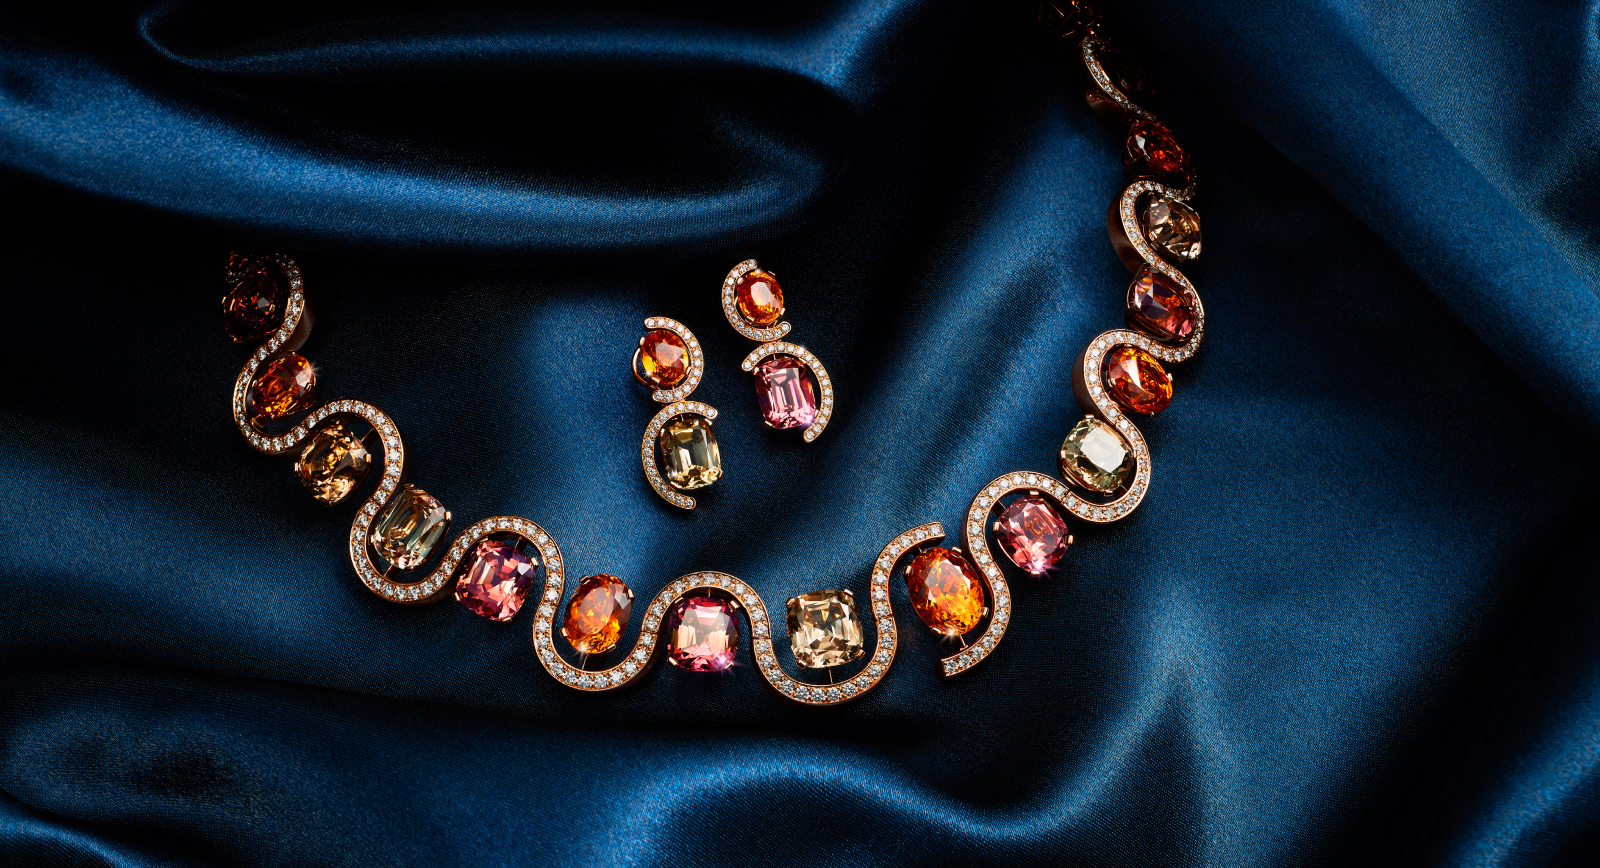 Bucherer Fine Jewellery necklace and earrings with mandarin garnets, tourmalines and diamonds from the Manhattan High Jewellery collection 